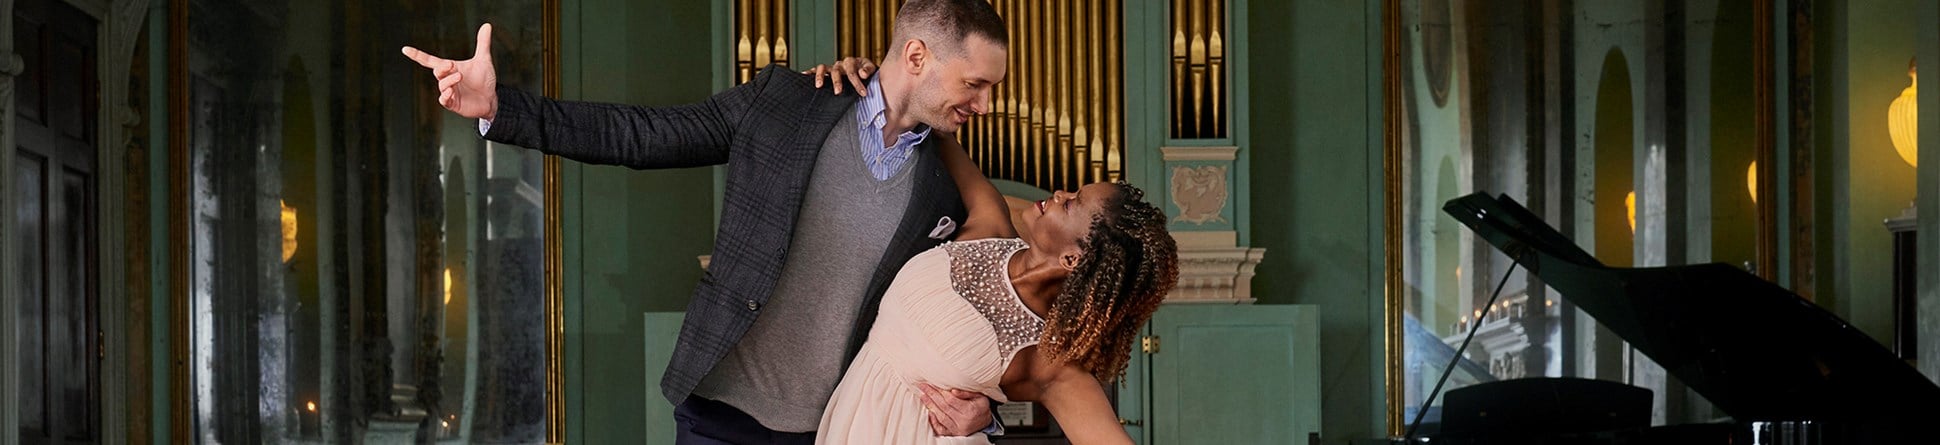 A couple dancing under a chandelier and a piano and organ in the background